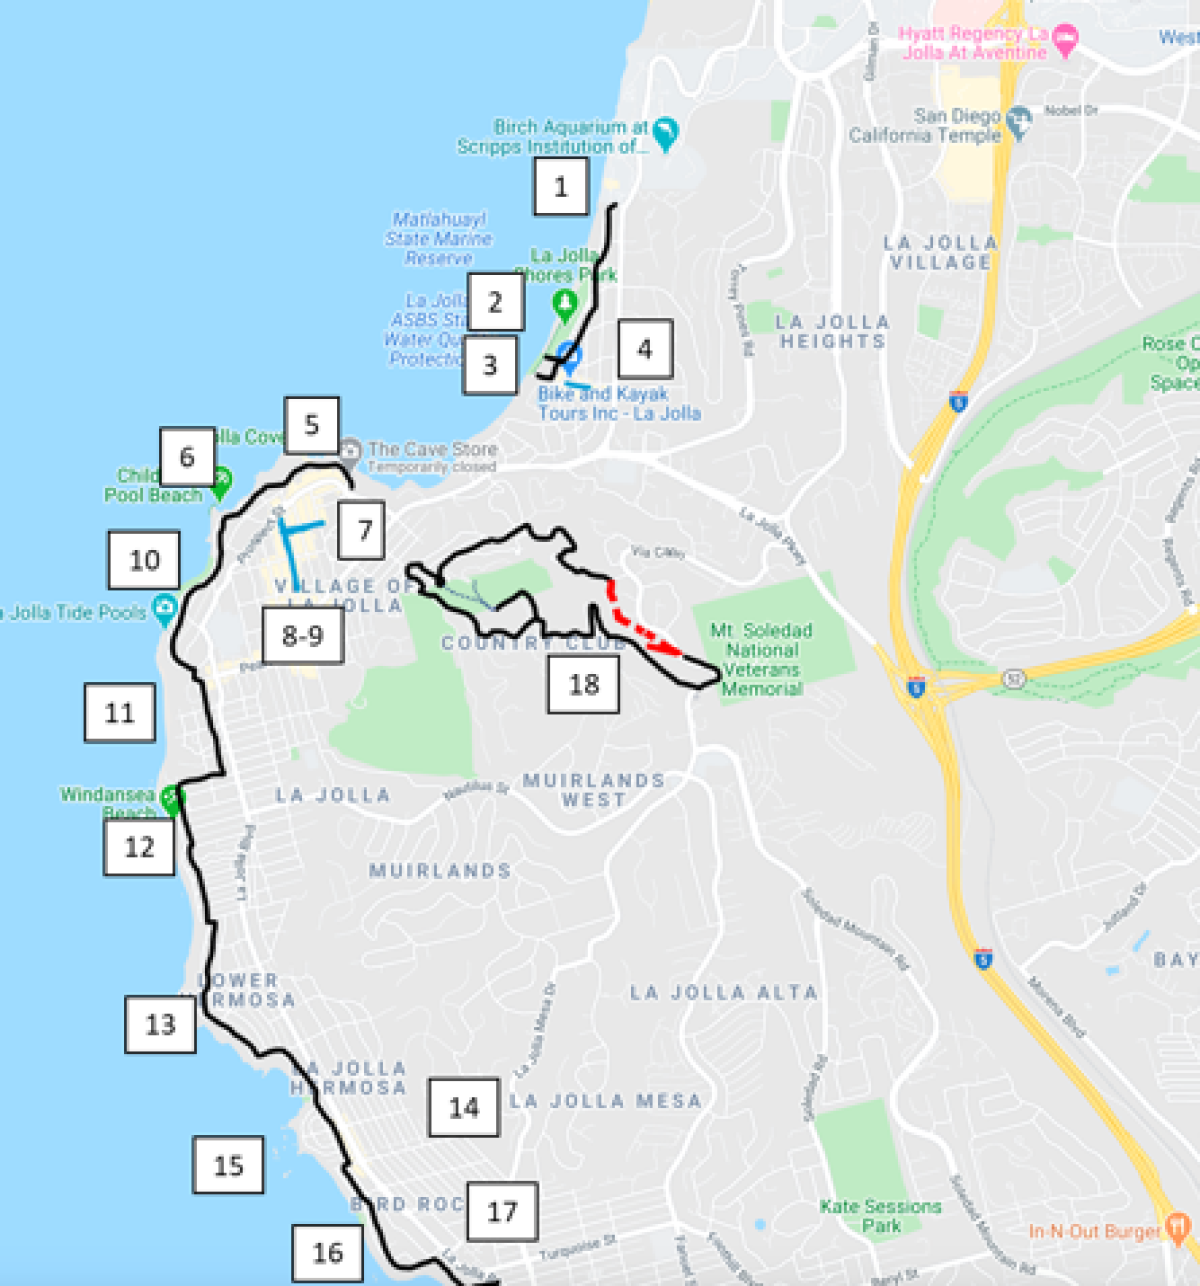 A map indicates possible "slow streets" suggested by La Jolla's community planning groups.